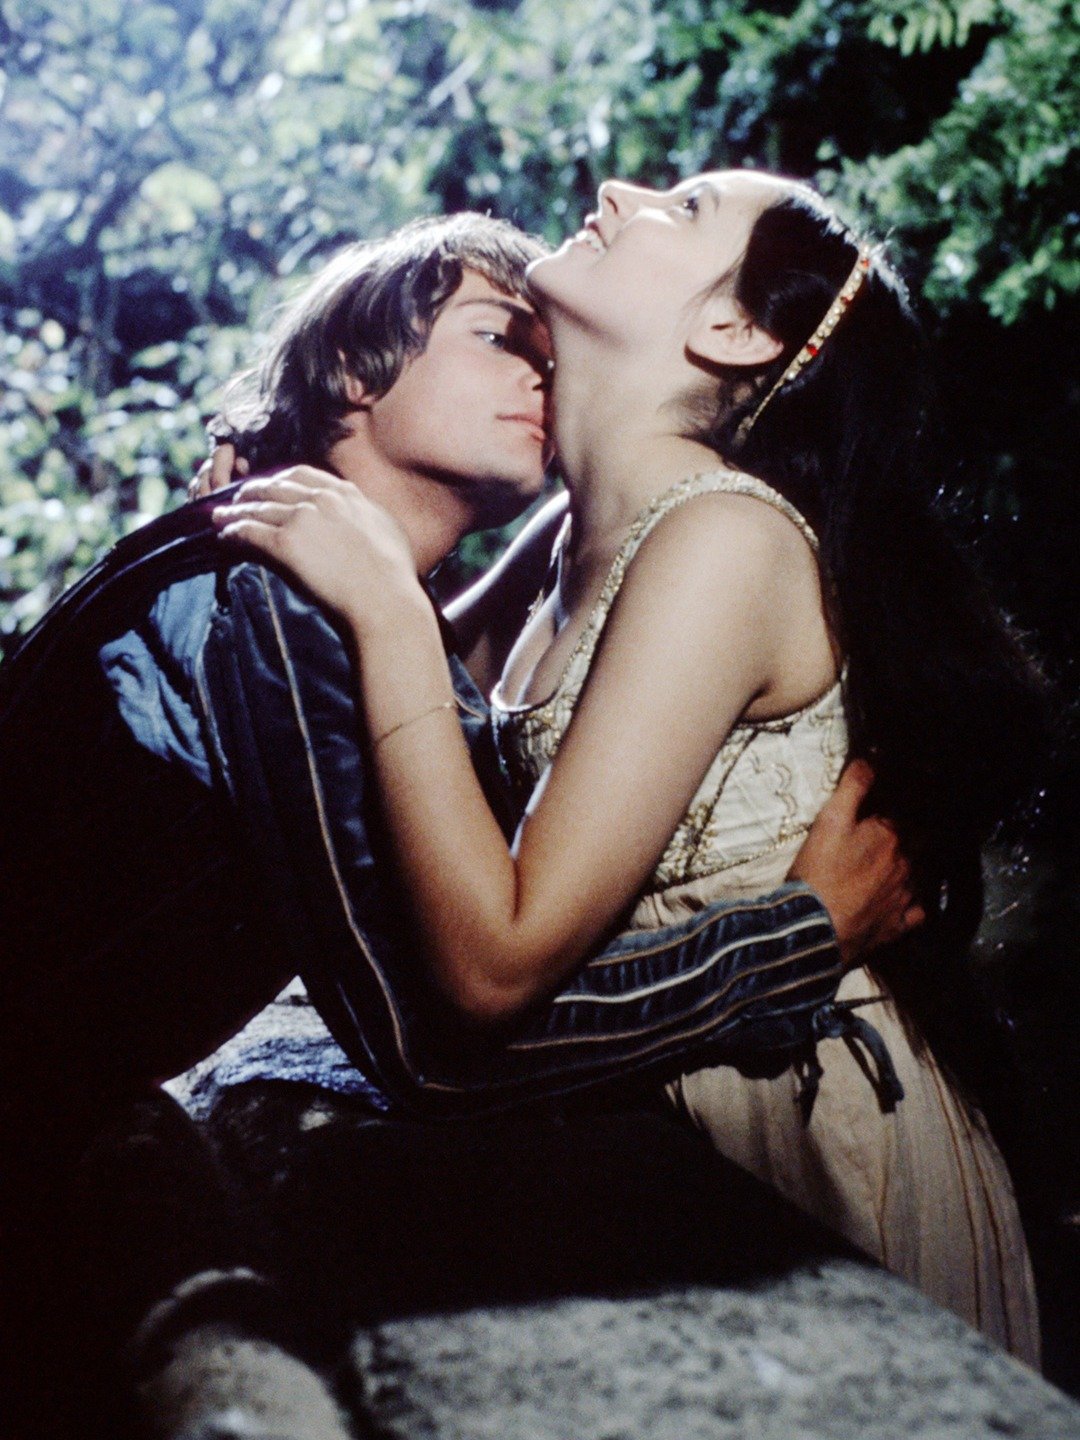 Romeo And Juliet Official Clip Thus With A Kiss I Die Trailers And Videos Rotten Tomatoes 